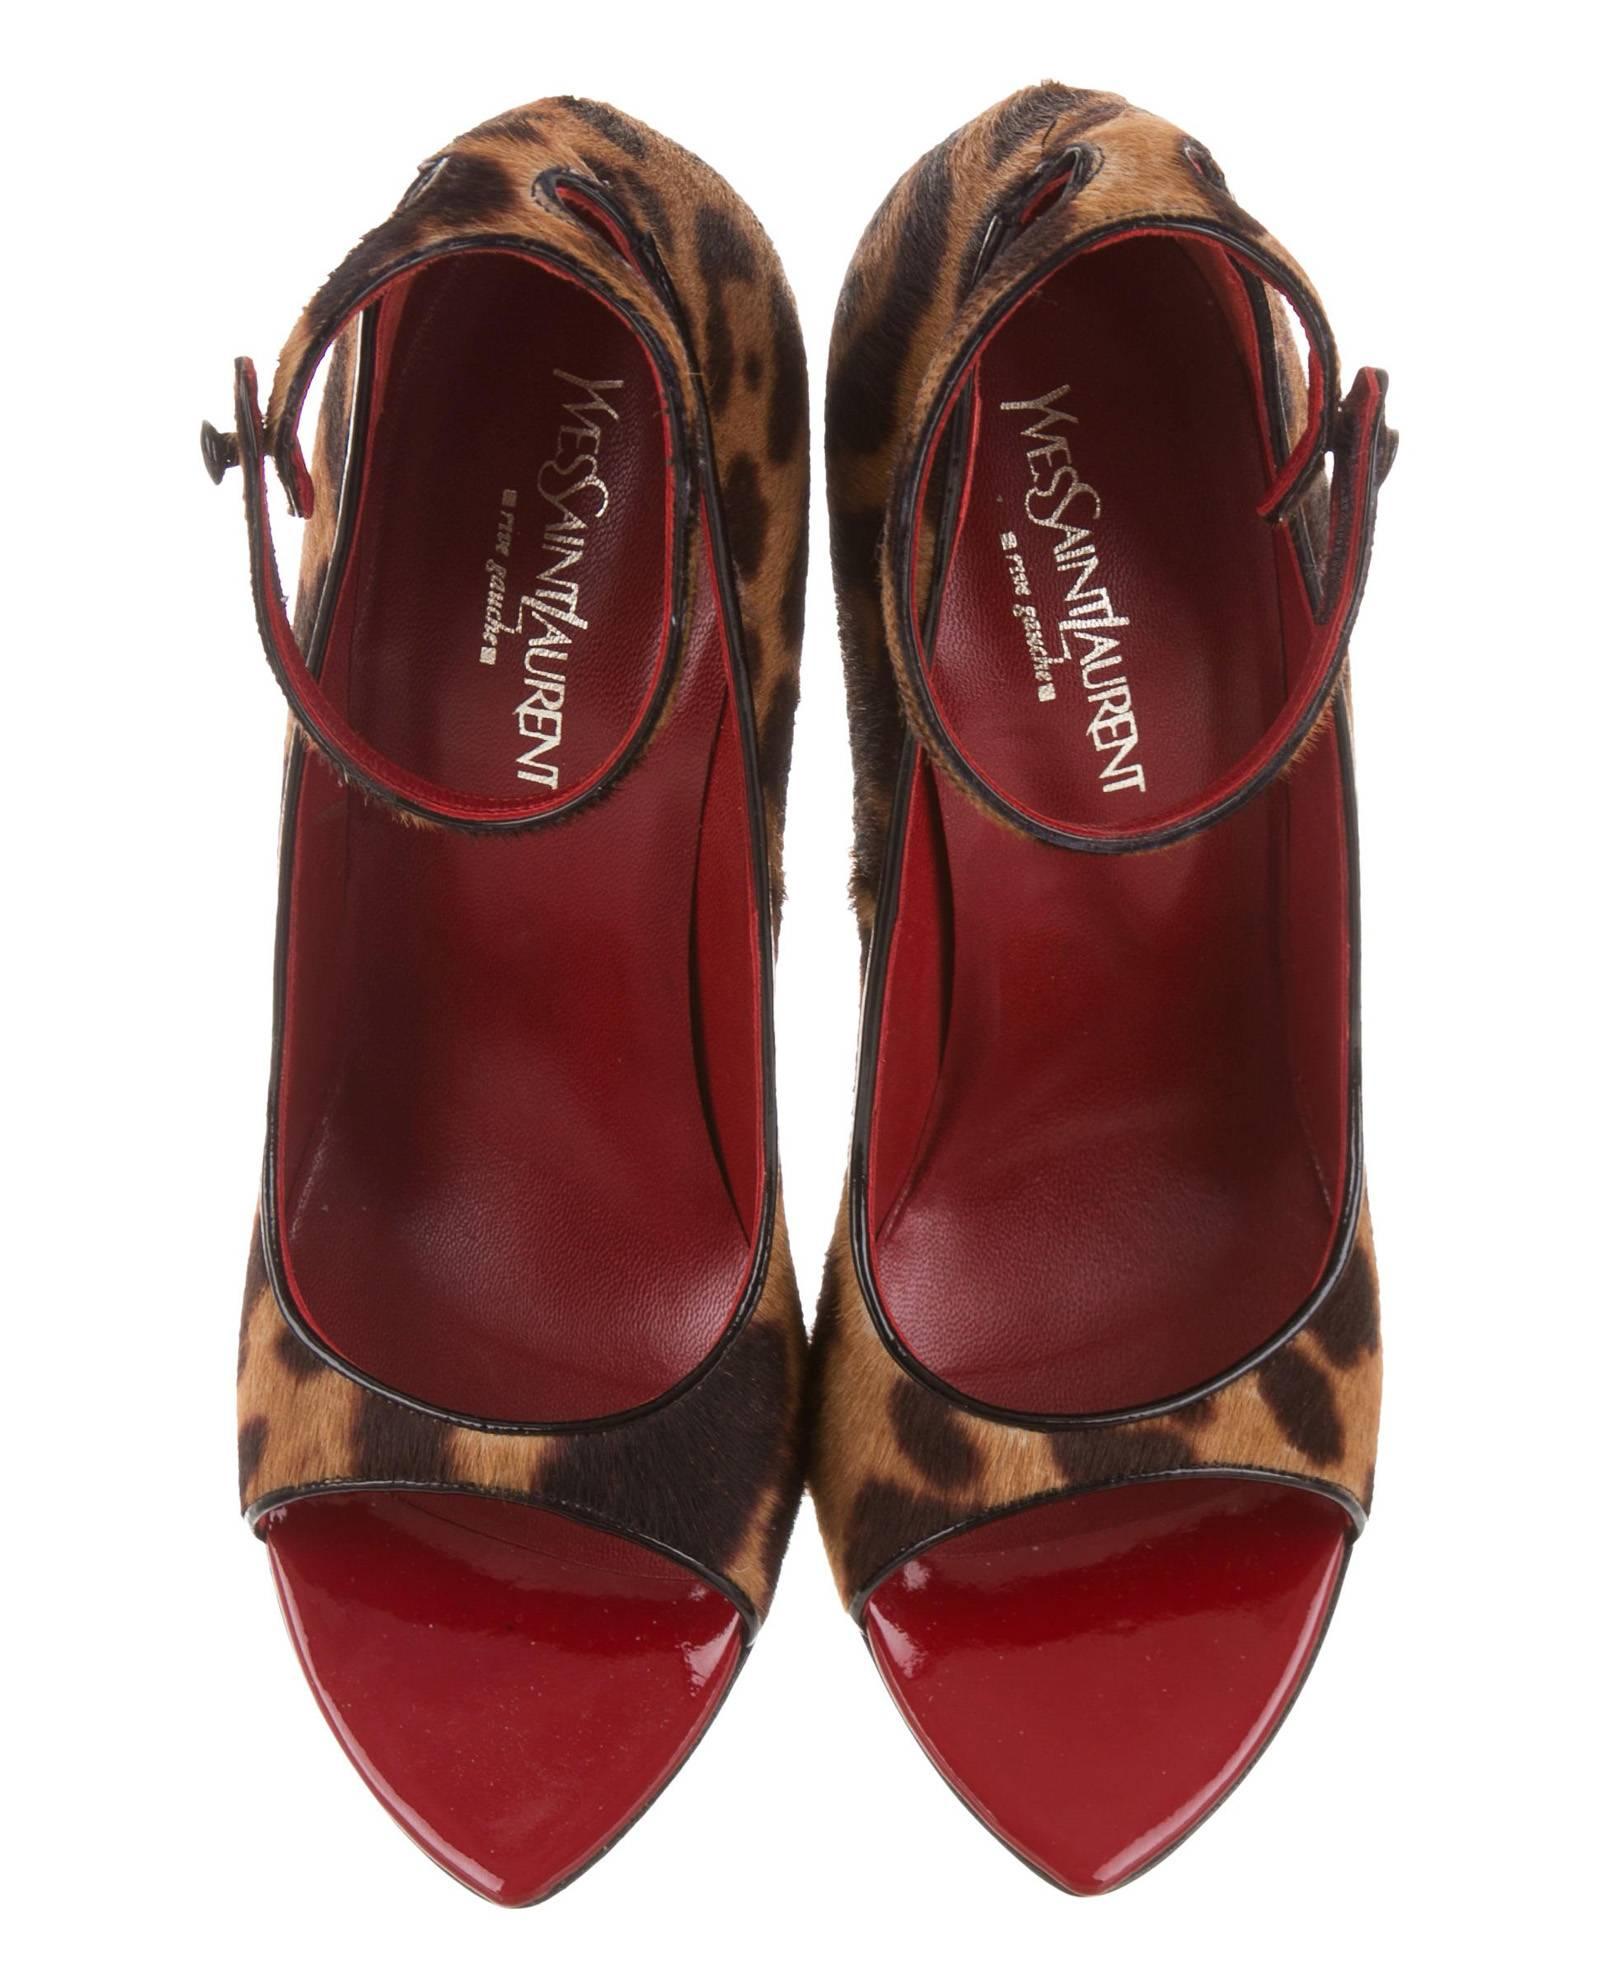 Tom Ford for Yves Saint Laurent Rive Gauche Pony Hair Patent Leather Shoes Wedges
F/W 2004 Collection
Designer size 40
Leopard Print, Pony Hair, Dark Red Patent Leather, Ankle Straps, Leather Sole and Insole, High Heel - 4.5 inches.
Made in